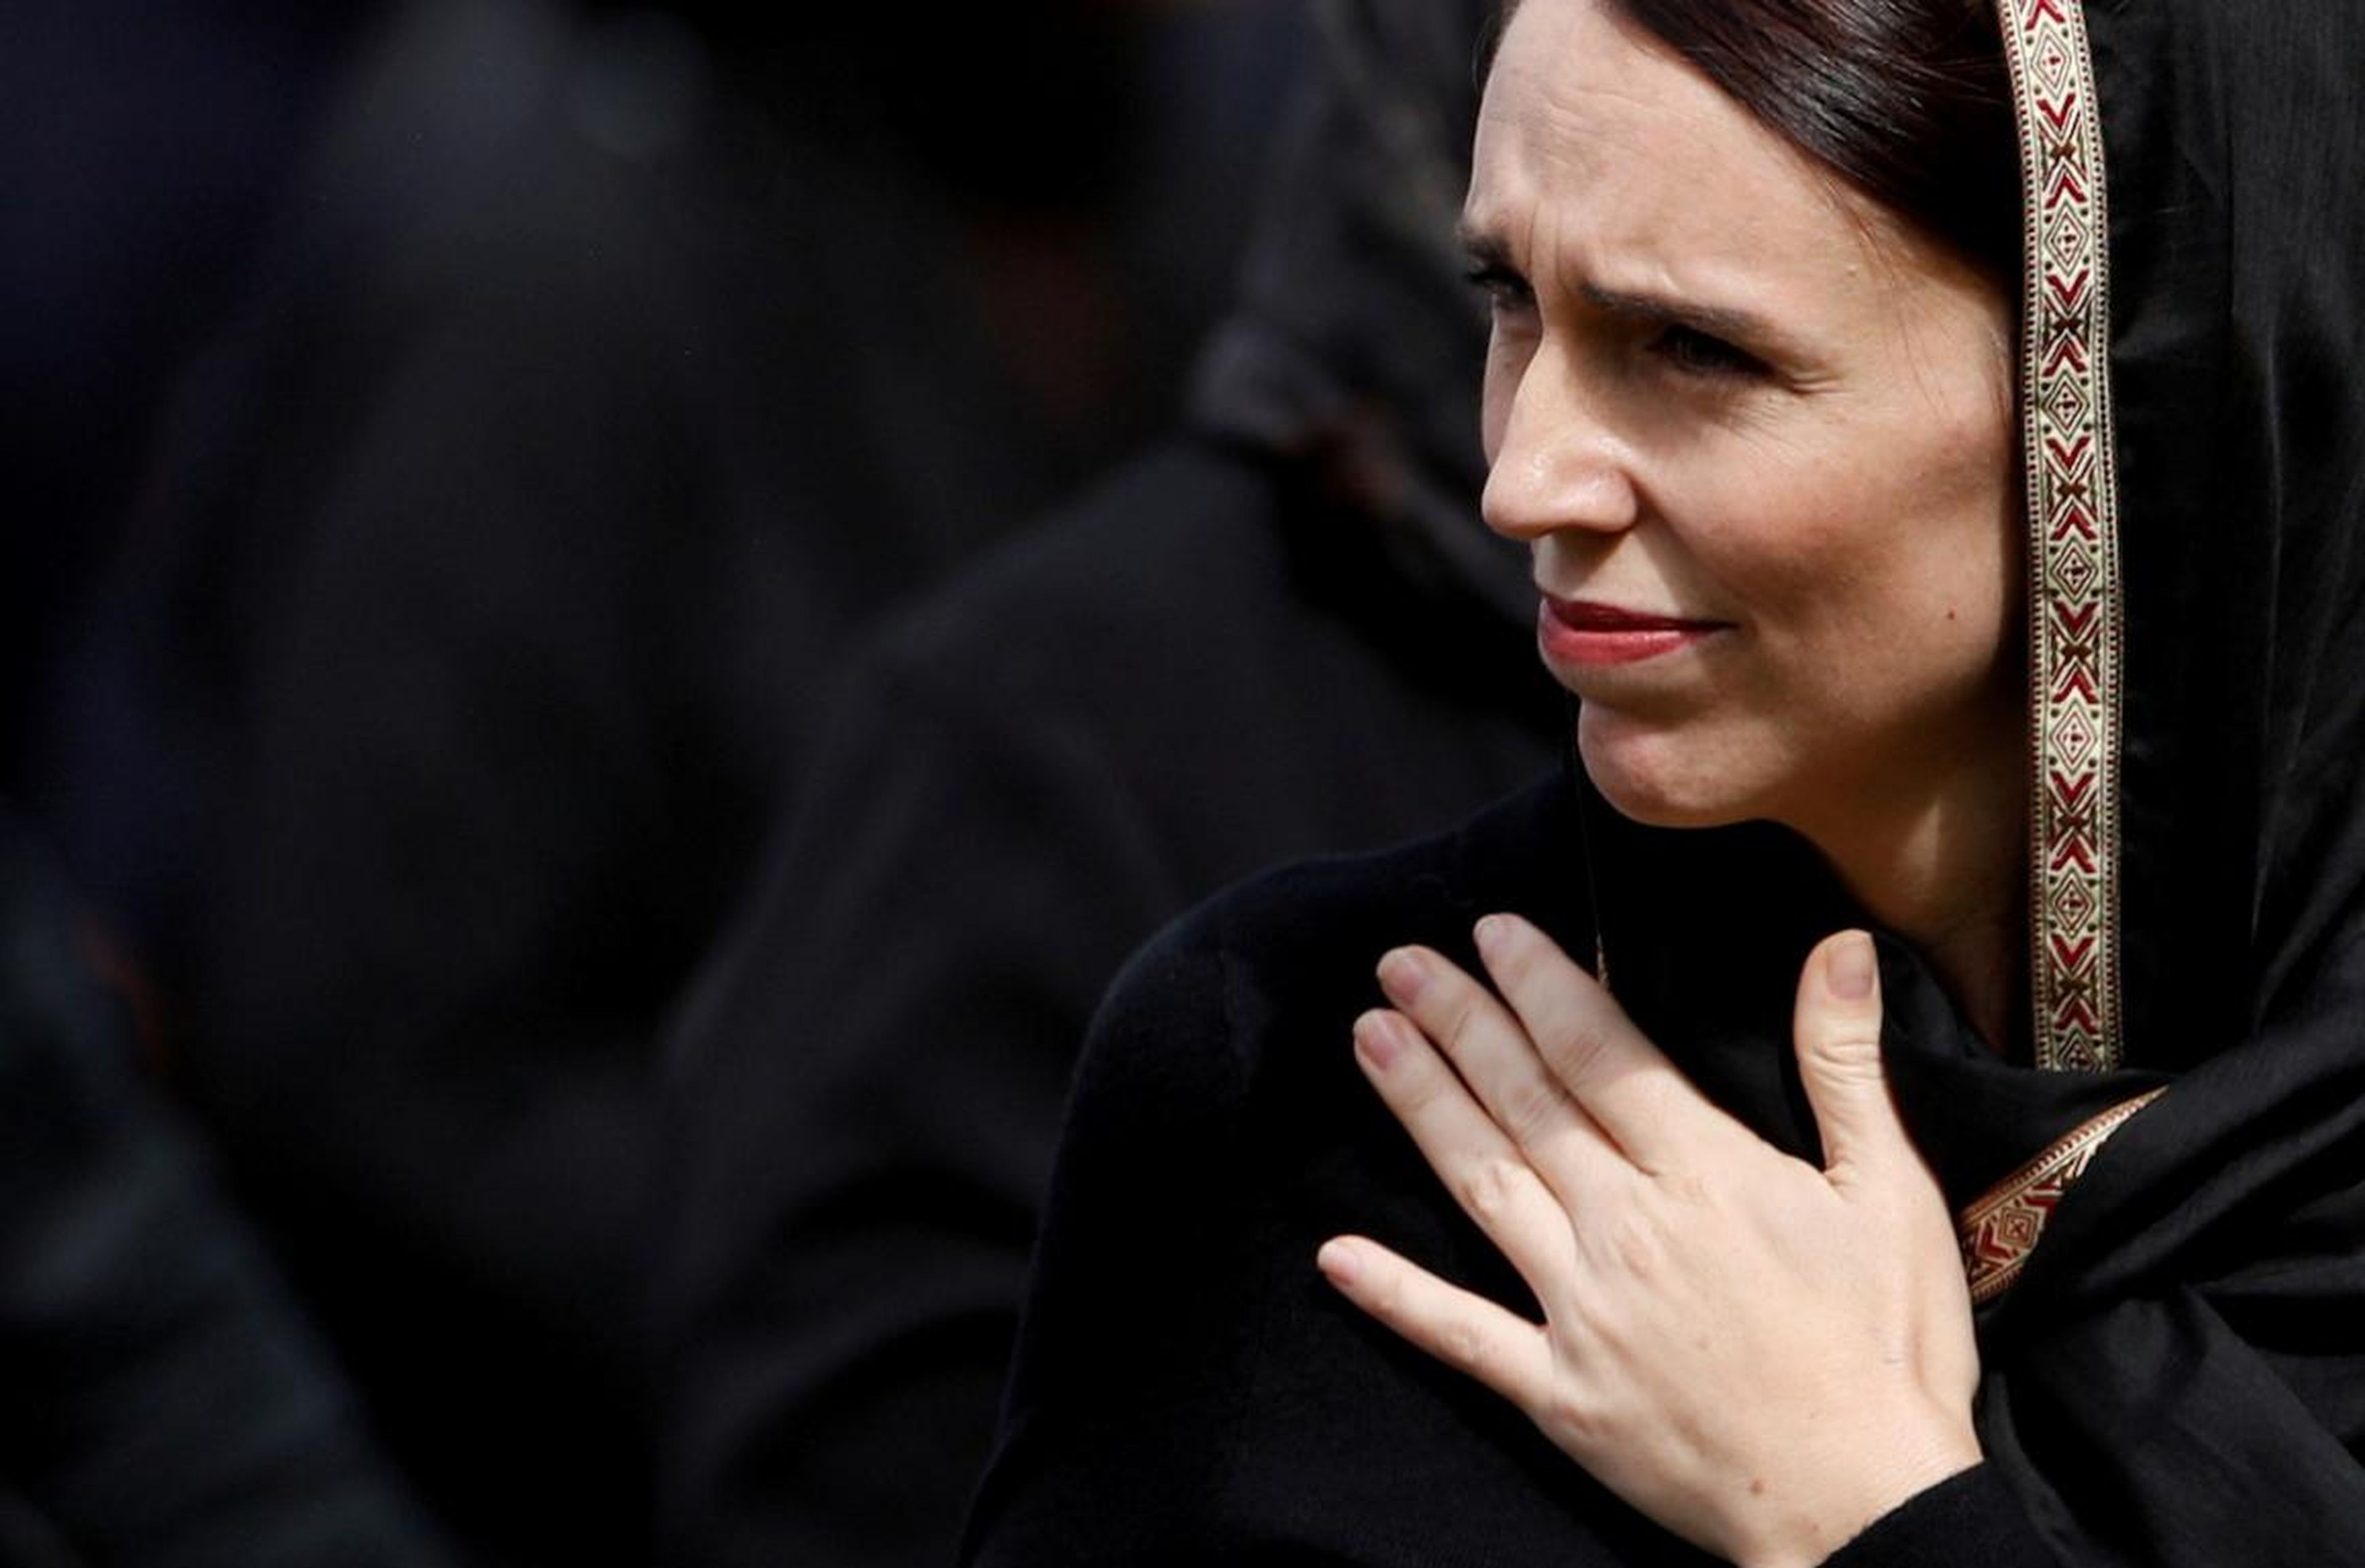 New Zealand's Prime Minister Jacinda Ardern leaves after the Friday prayers at Hagley Park outside Al-Noor mosque in Christchurch, New Zealand, on March 22. The mosque was one of two in Christchurch attacked by a lone suspected